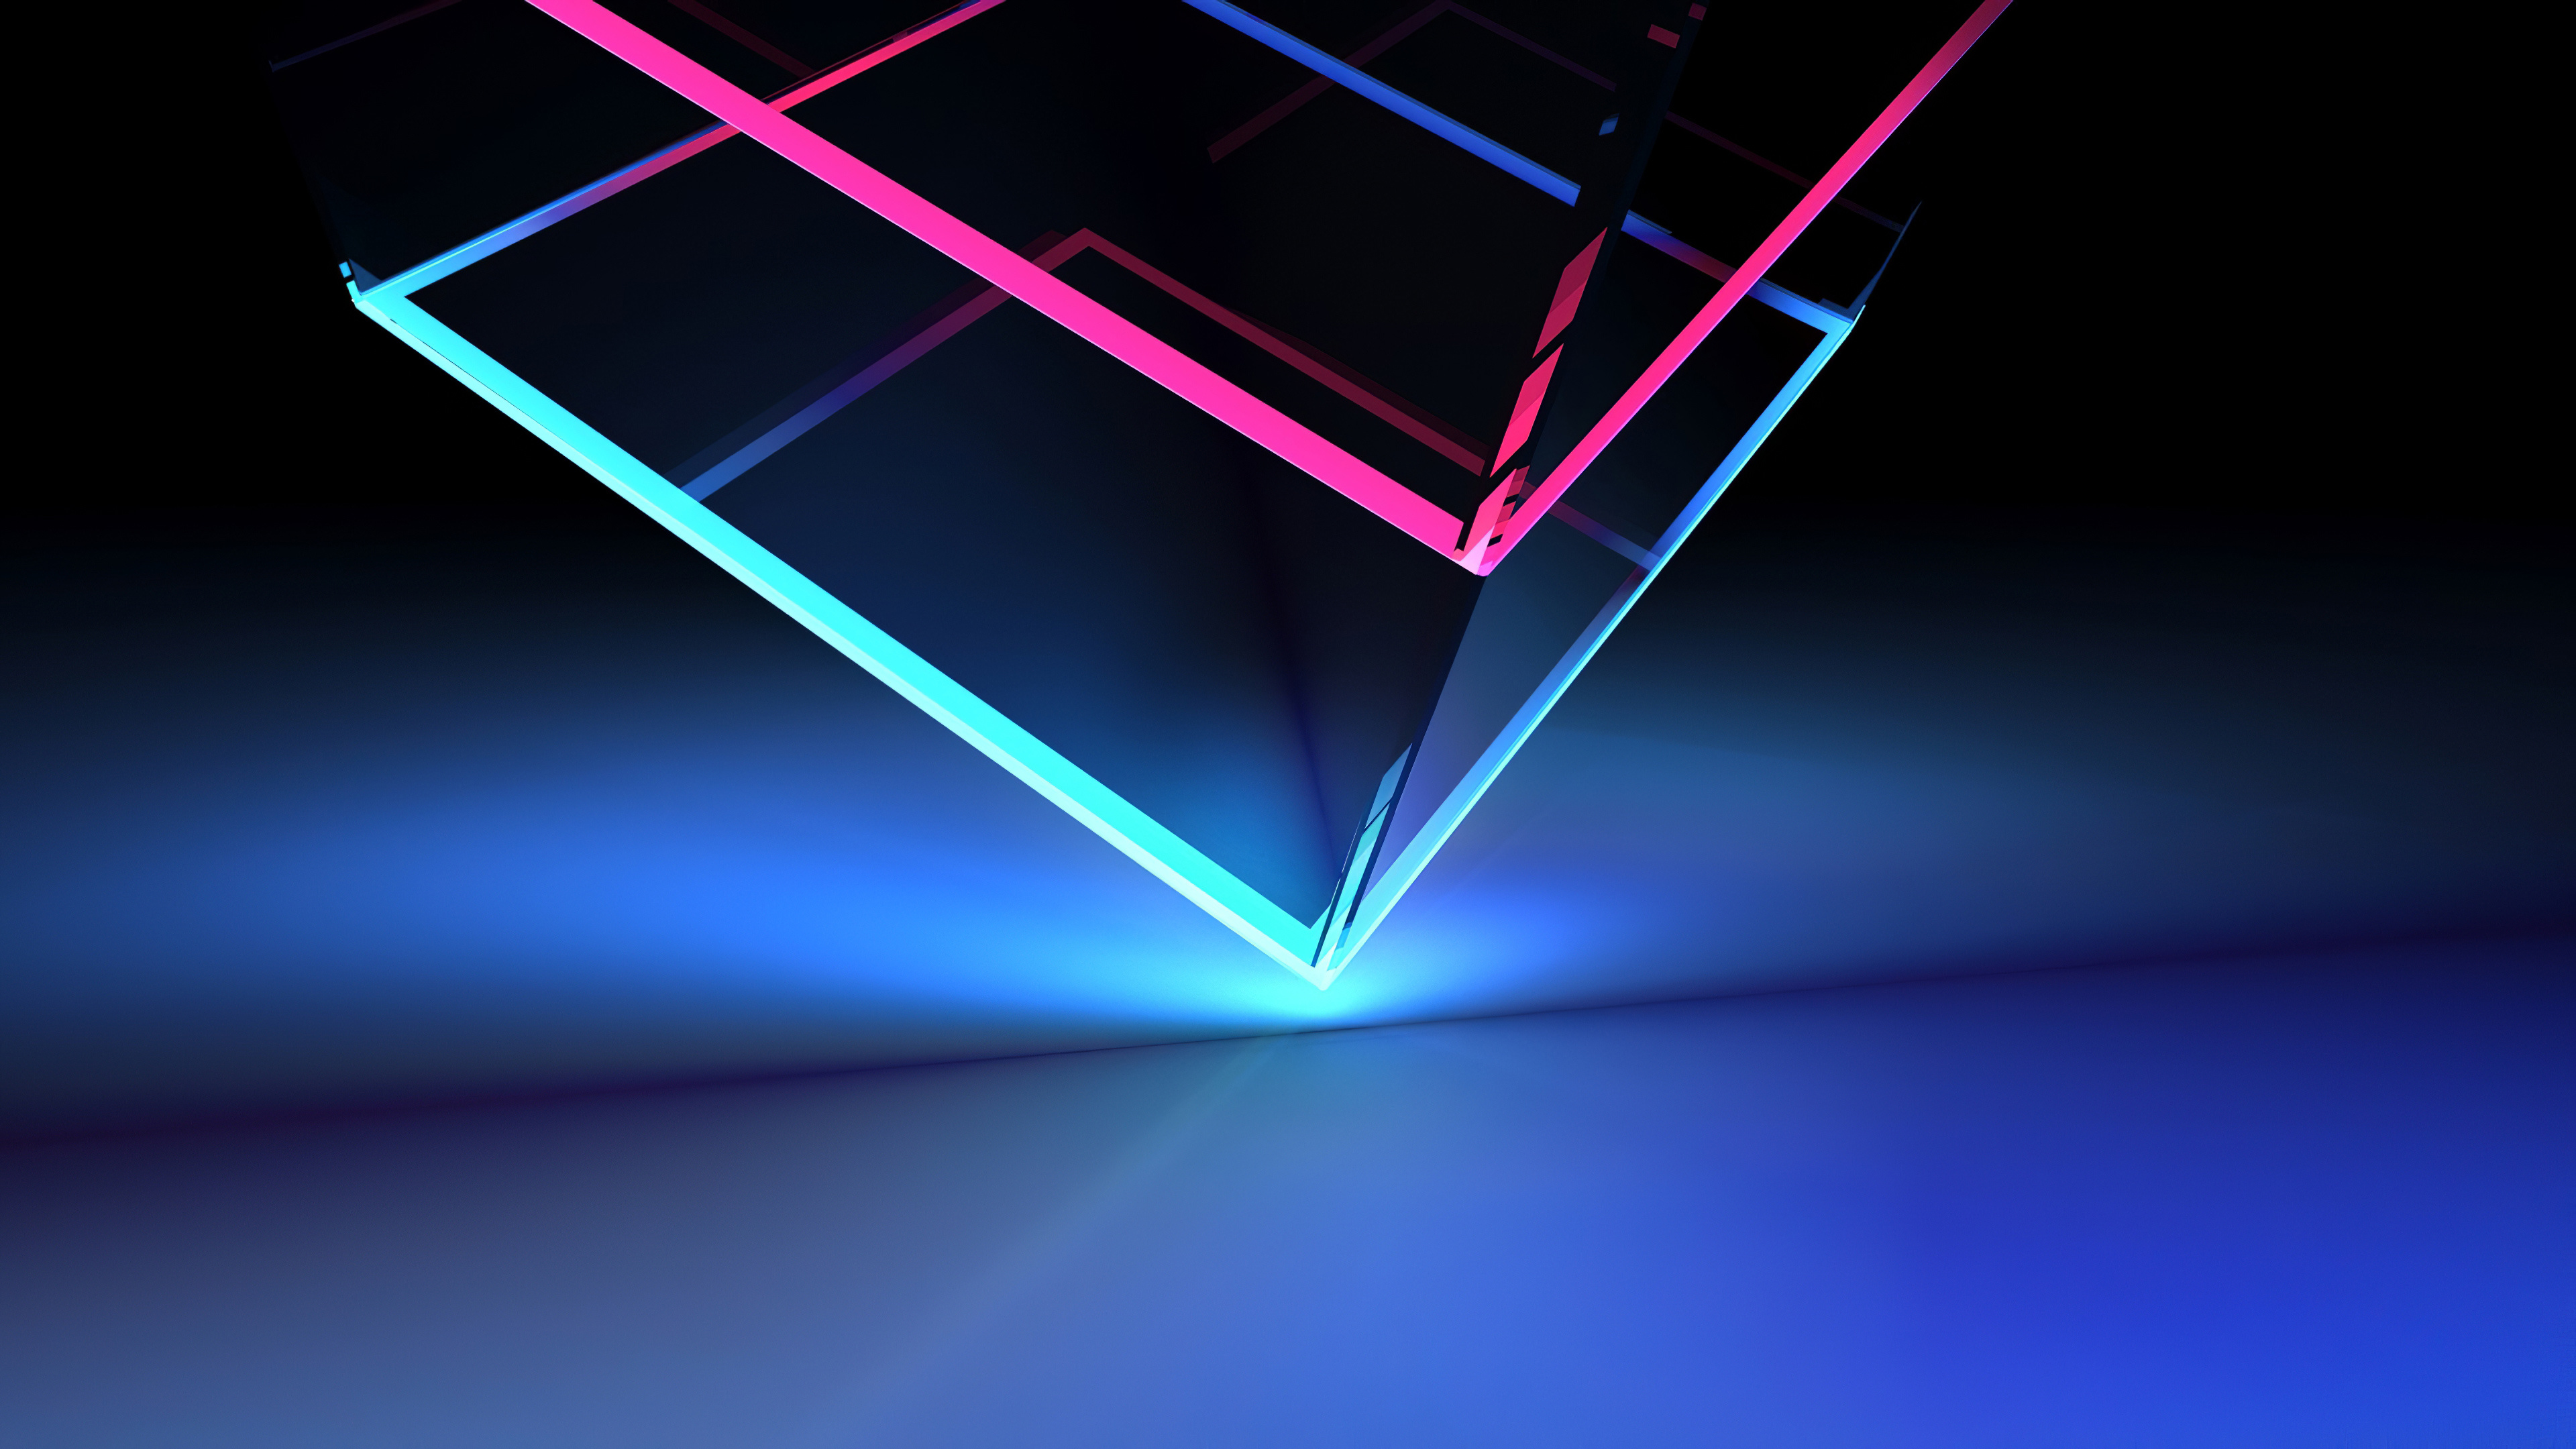 Neon Cube, Abstract Shapes, 4K HD Wallpaper, Colorful Backgrounds, 3840x2160 4K Desktop